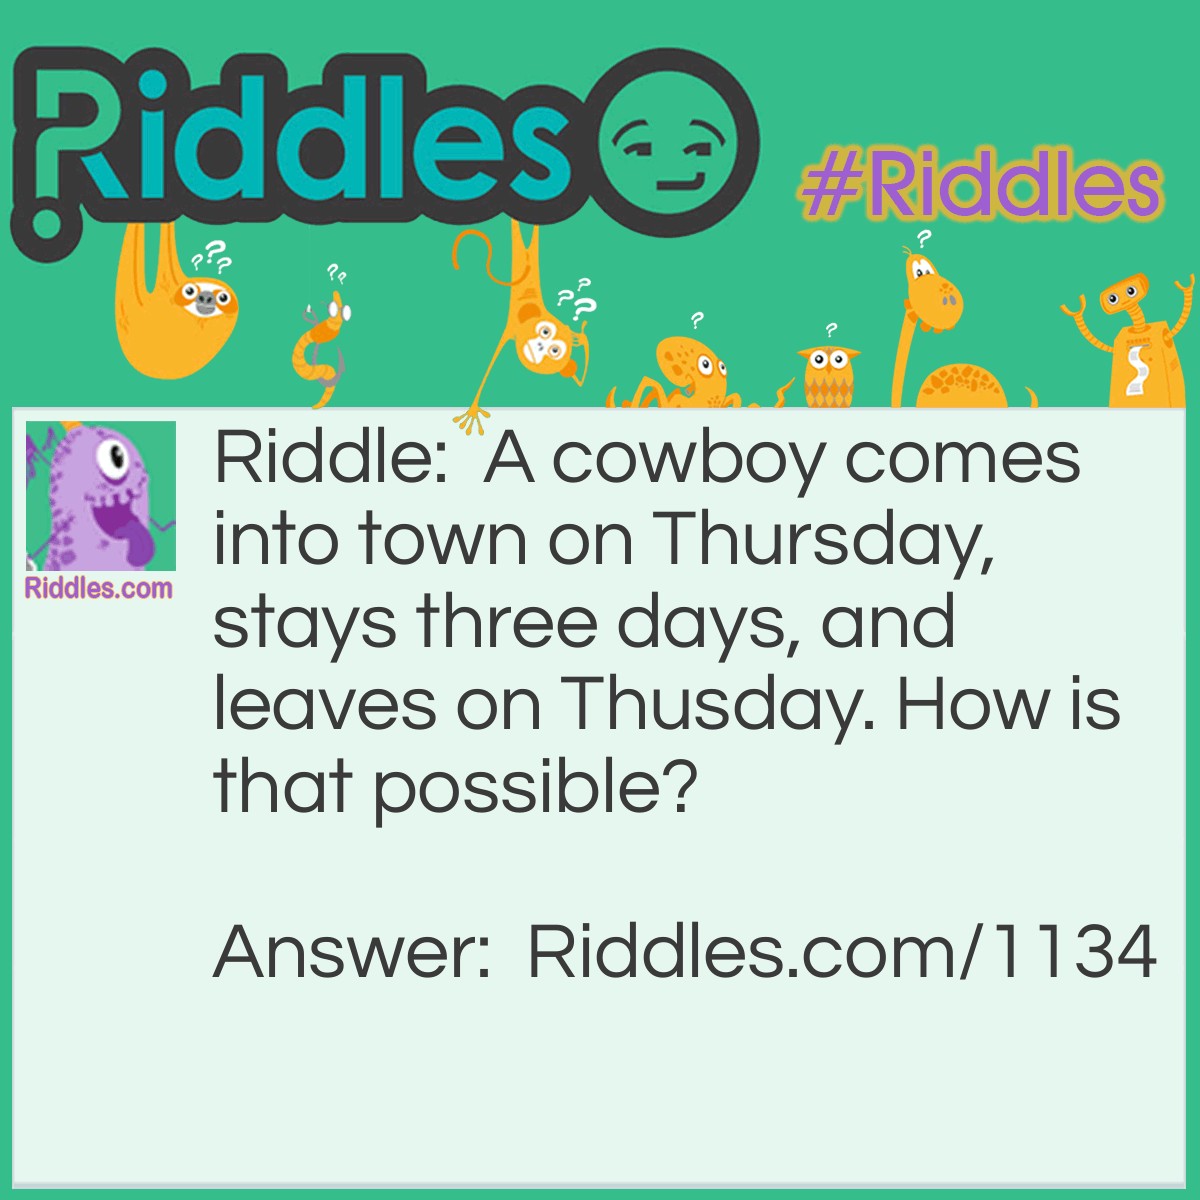 Riddle: A cowboy comes into town on Thursday,  stays three days, and leaves on Thusday. How is that possible? Answer: The cowboy's horse is named Thursday.